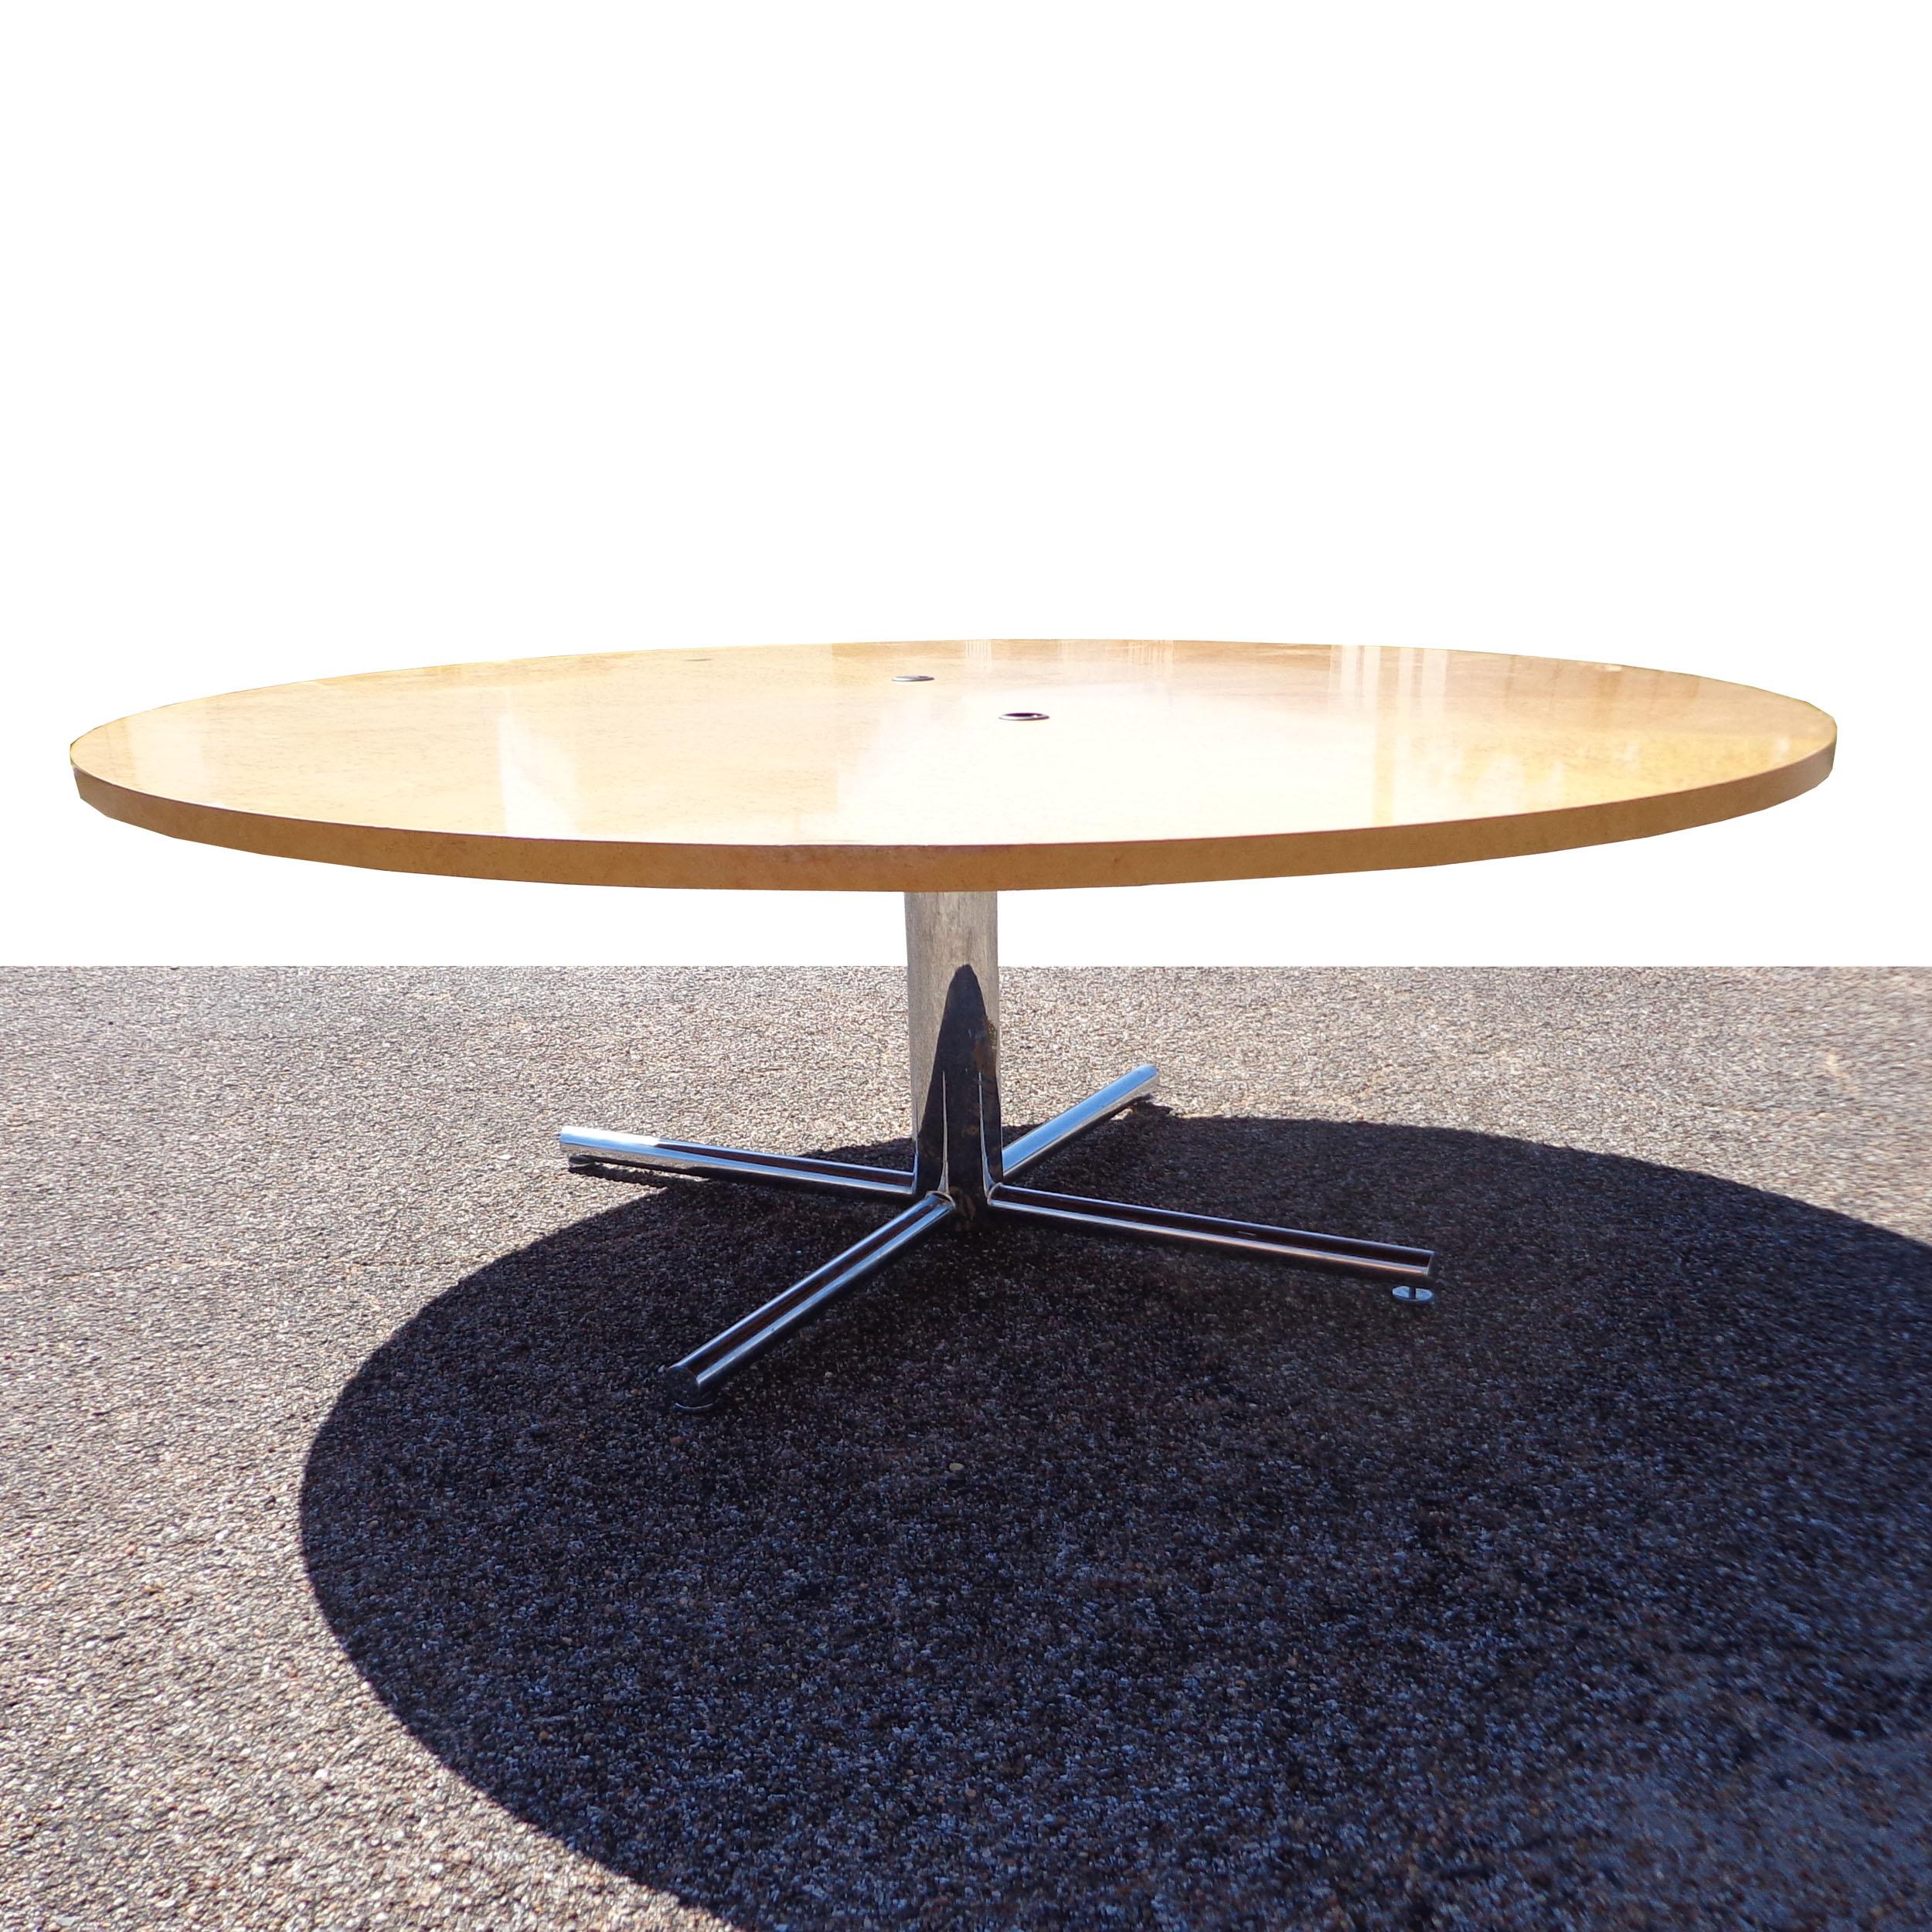 Late 20th Century Birdseye Maple Knoll Reff Conference Table For Sale